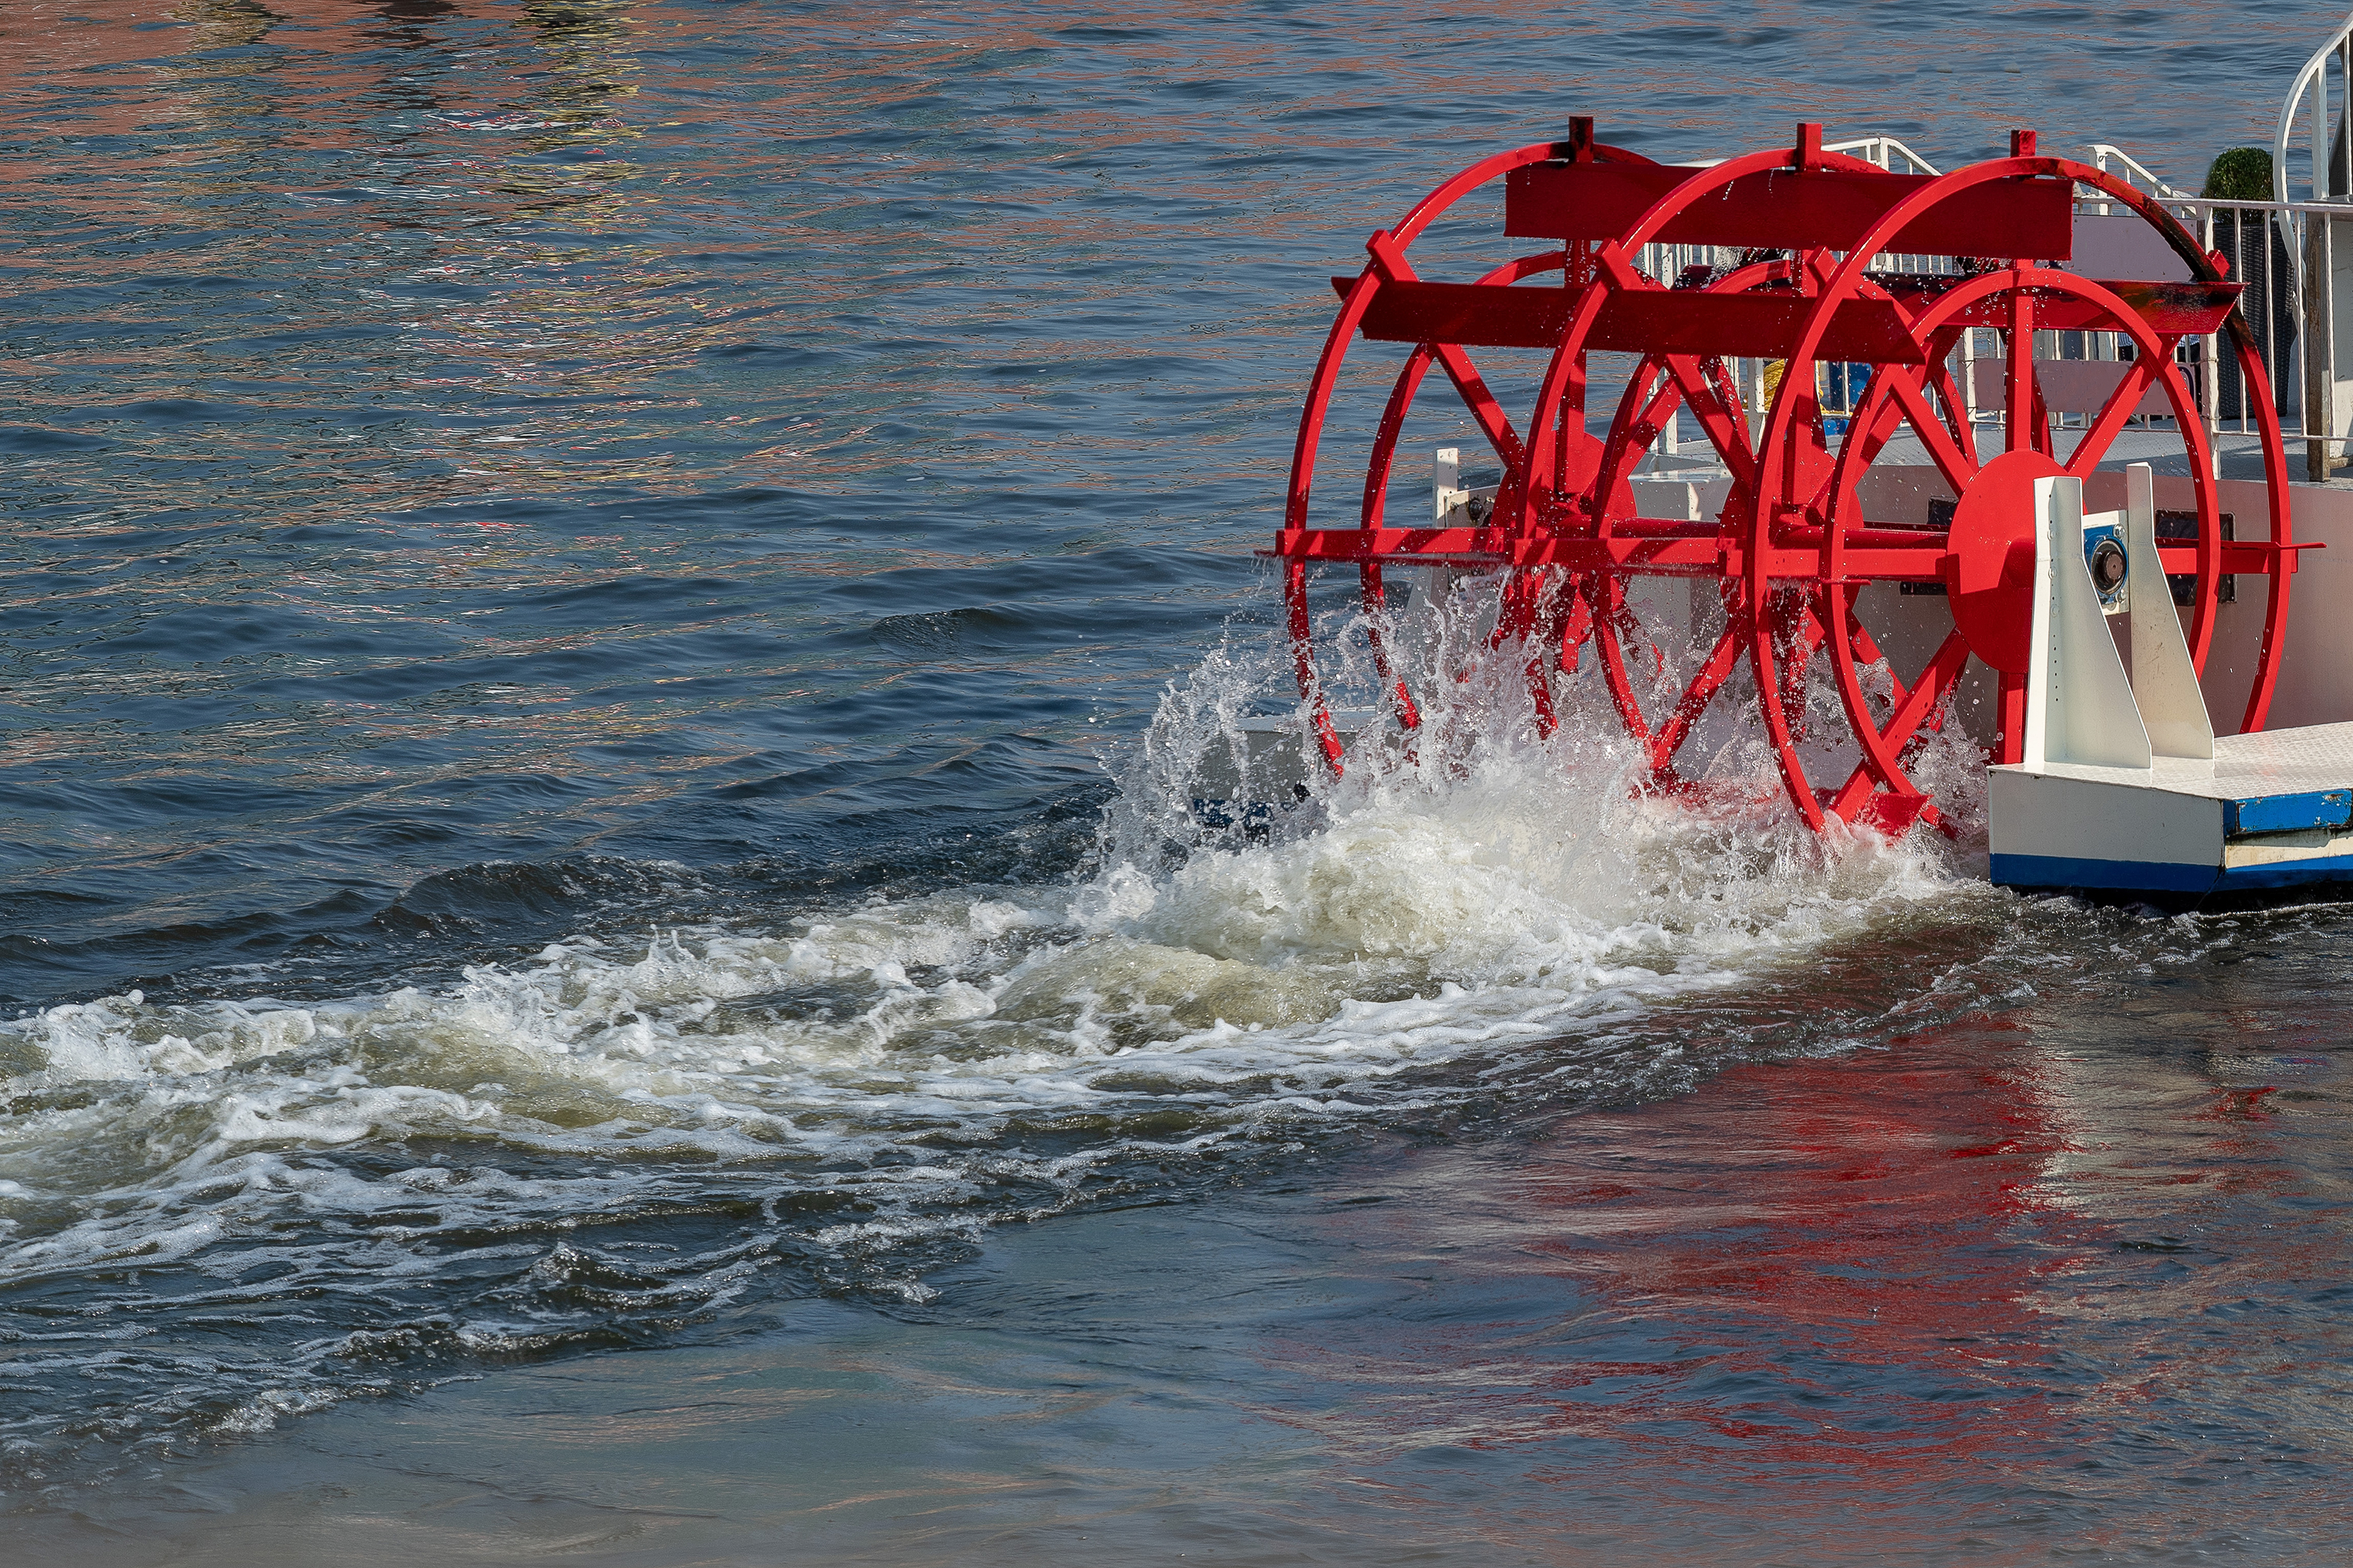 Red Paddlewheel on a boat in motion